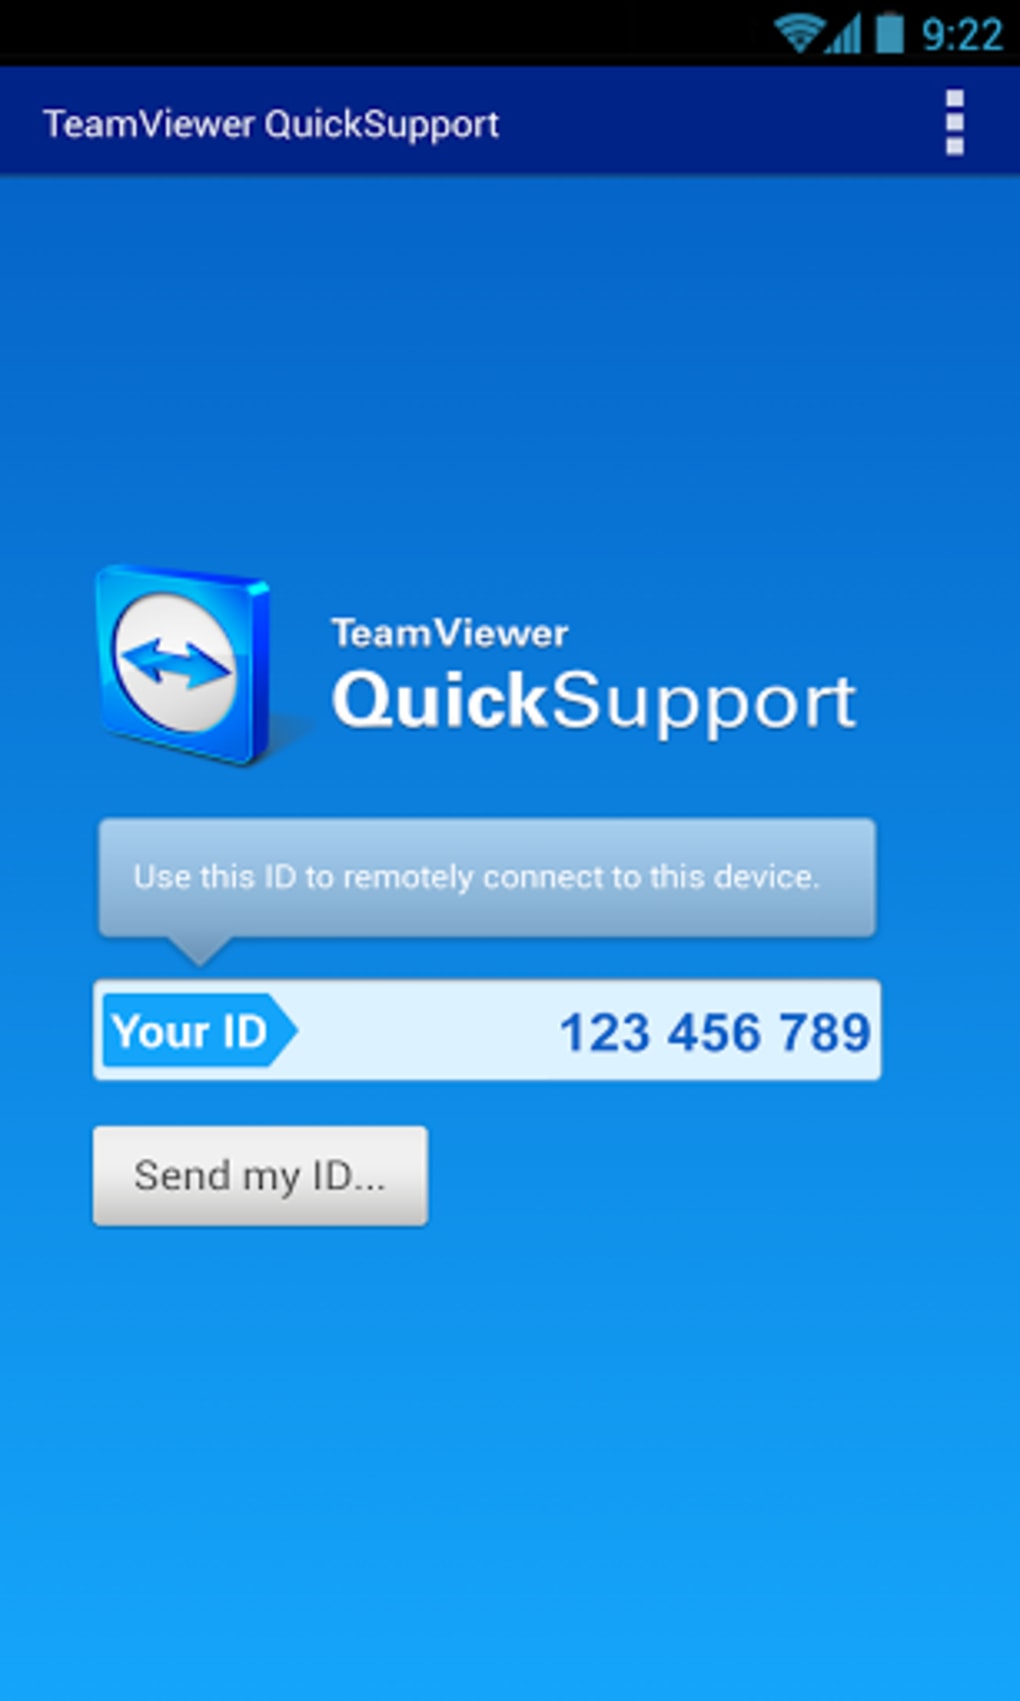 teamviewer apk download for pc